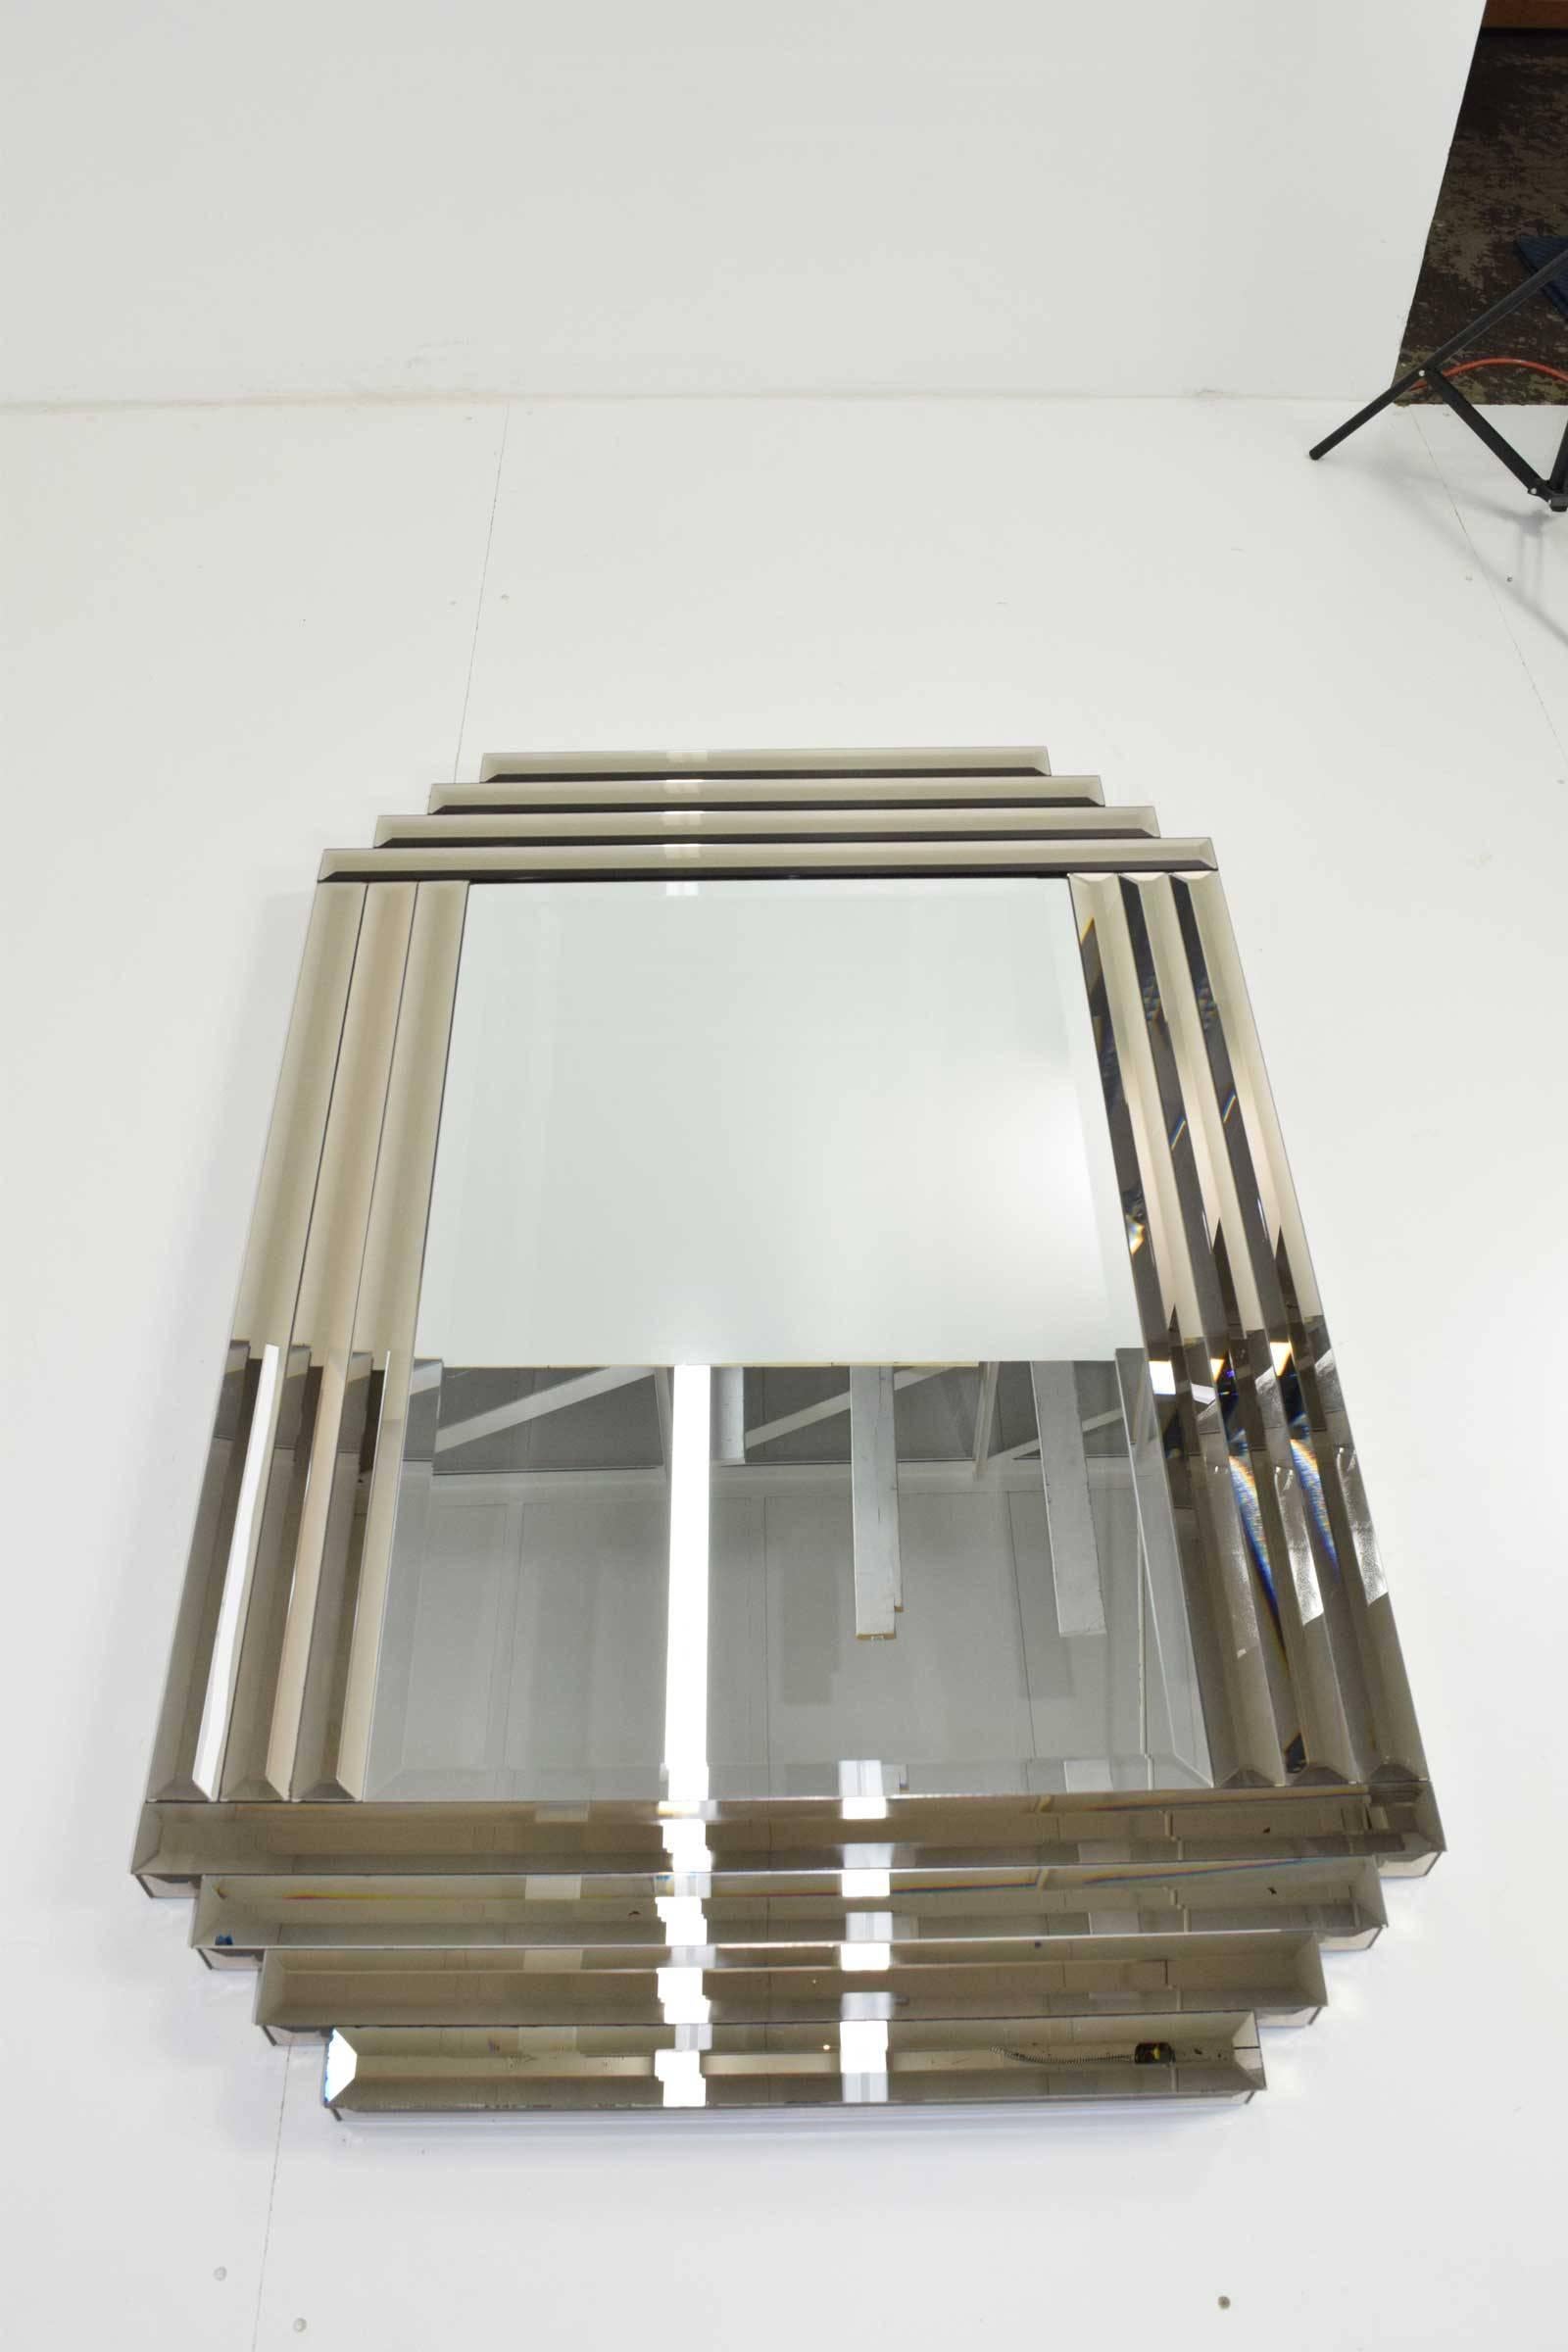 Bronze three layer beveled mirror edges. Beautiful mirror that can be hung horizontal or vertical. Perfect for any decor. This mirror is very well made with a heavy wood backing.